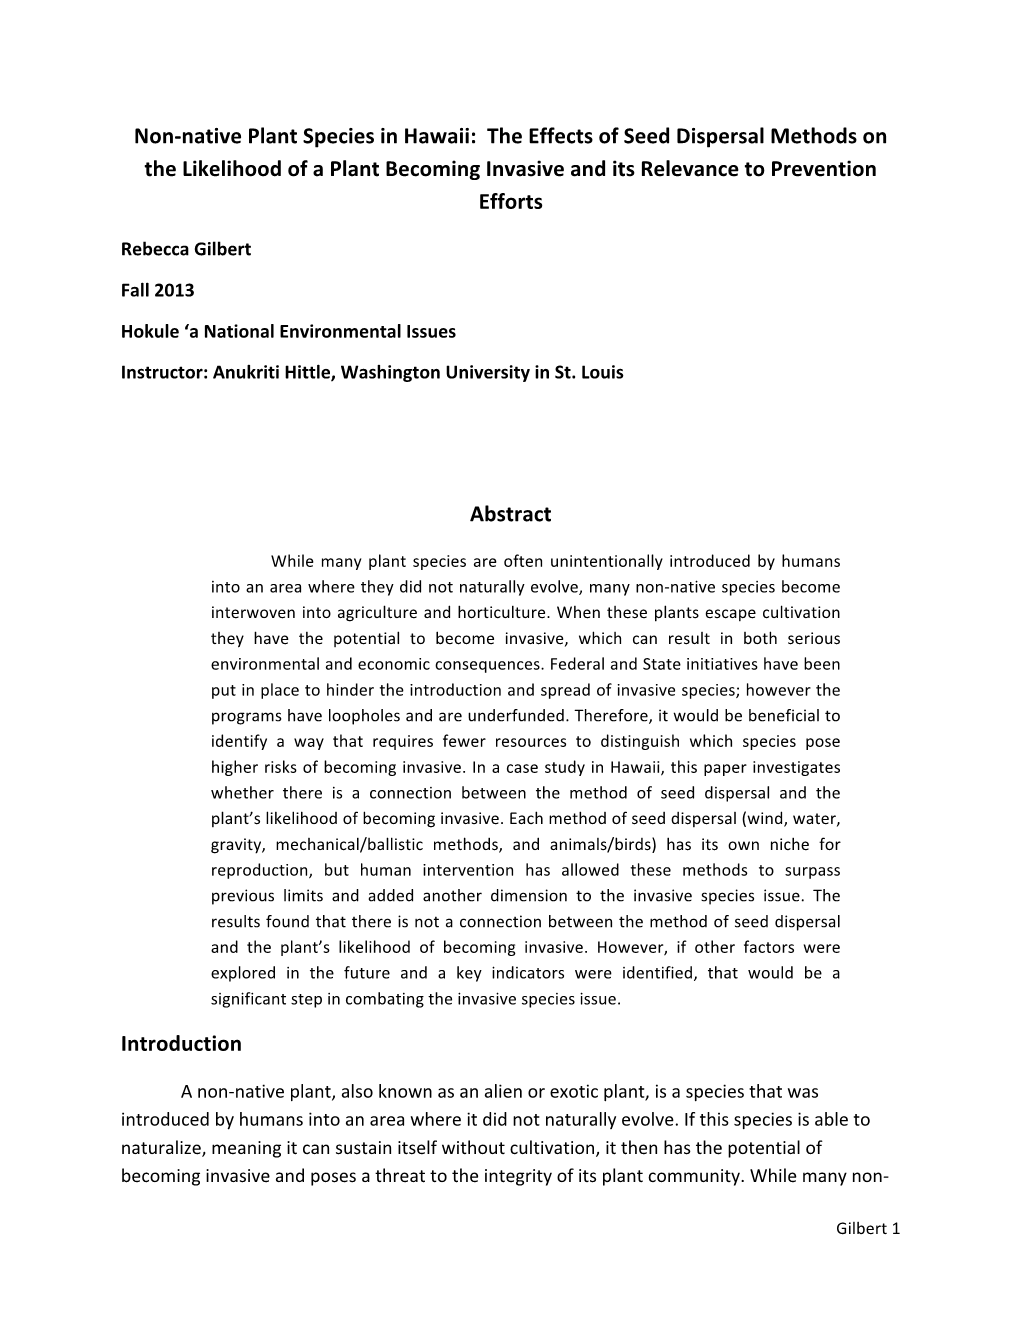 Non‐Native Plant Species in Hawaii: the Effects of Seed Dispersal Methods on the Likelihood of a Plant Becoming Invasive and Its Relevance to Prevention Efforts